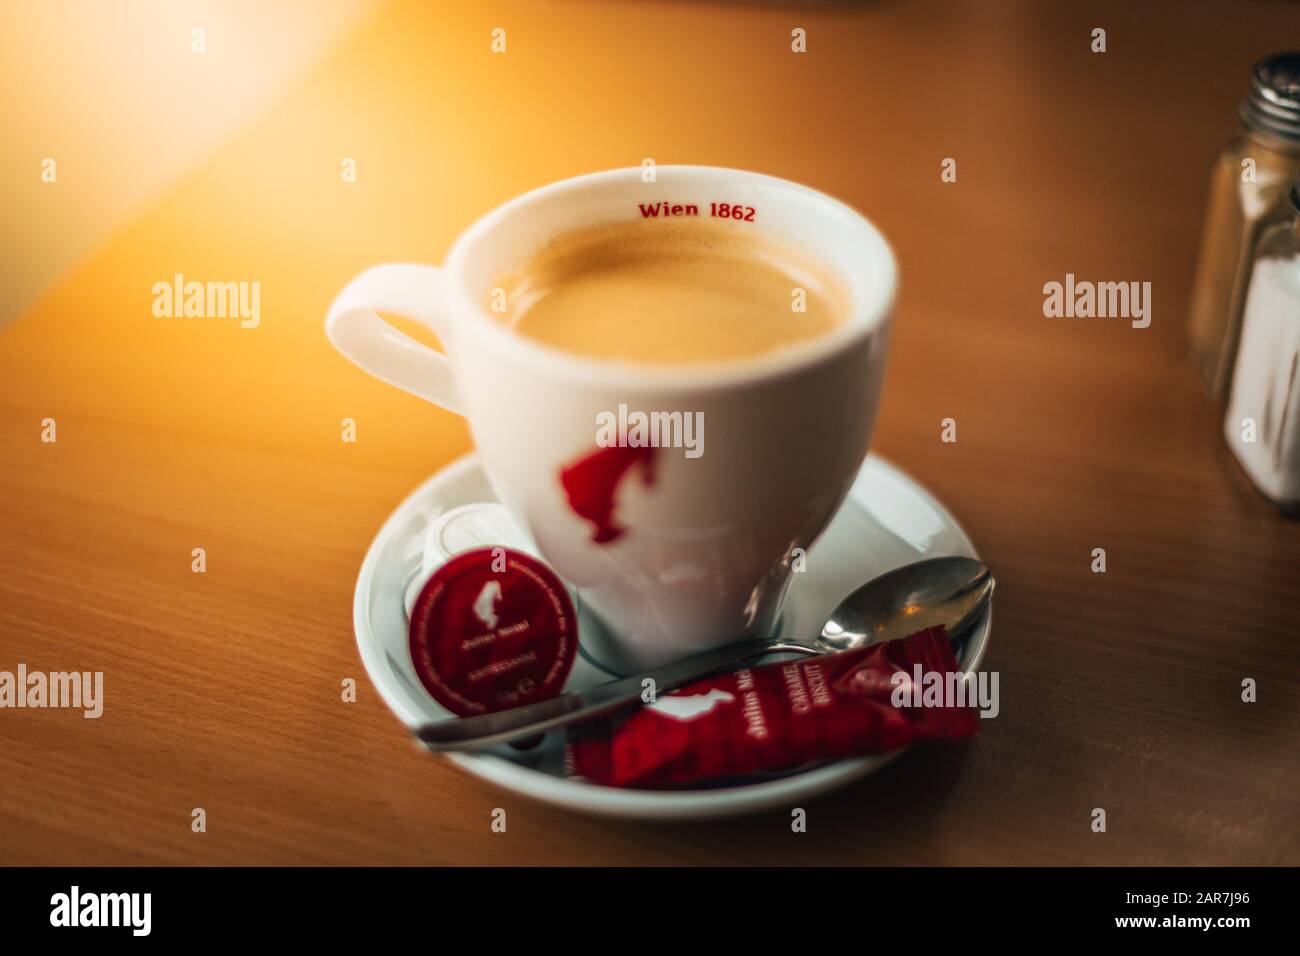 Würzburg, Germany - September 2019: A Cup of Julius Meinl espresso with the with a spoon, a cookie and milk to enjoy the coffee. Stock Photo